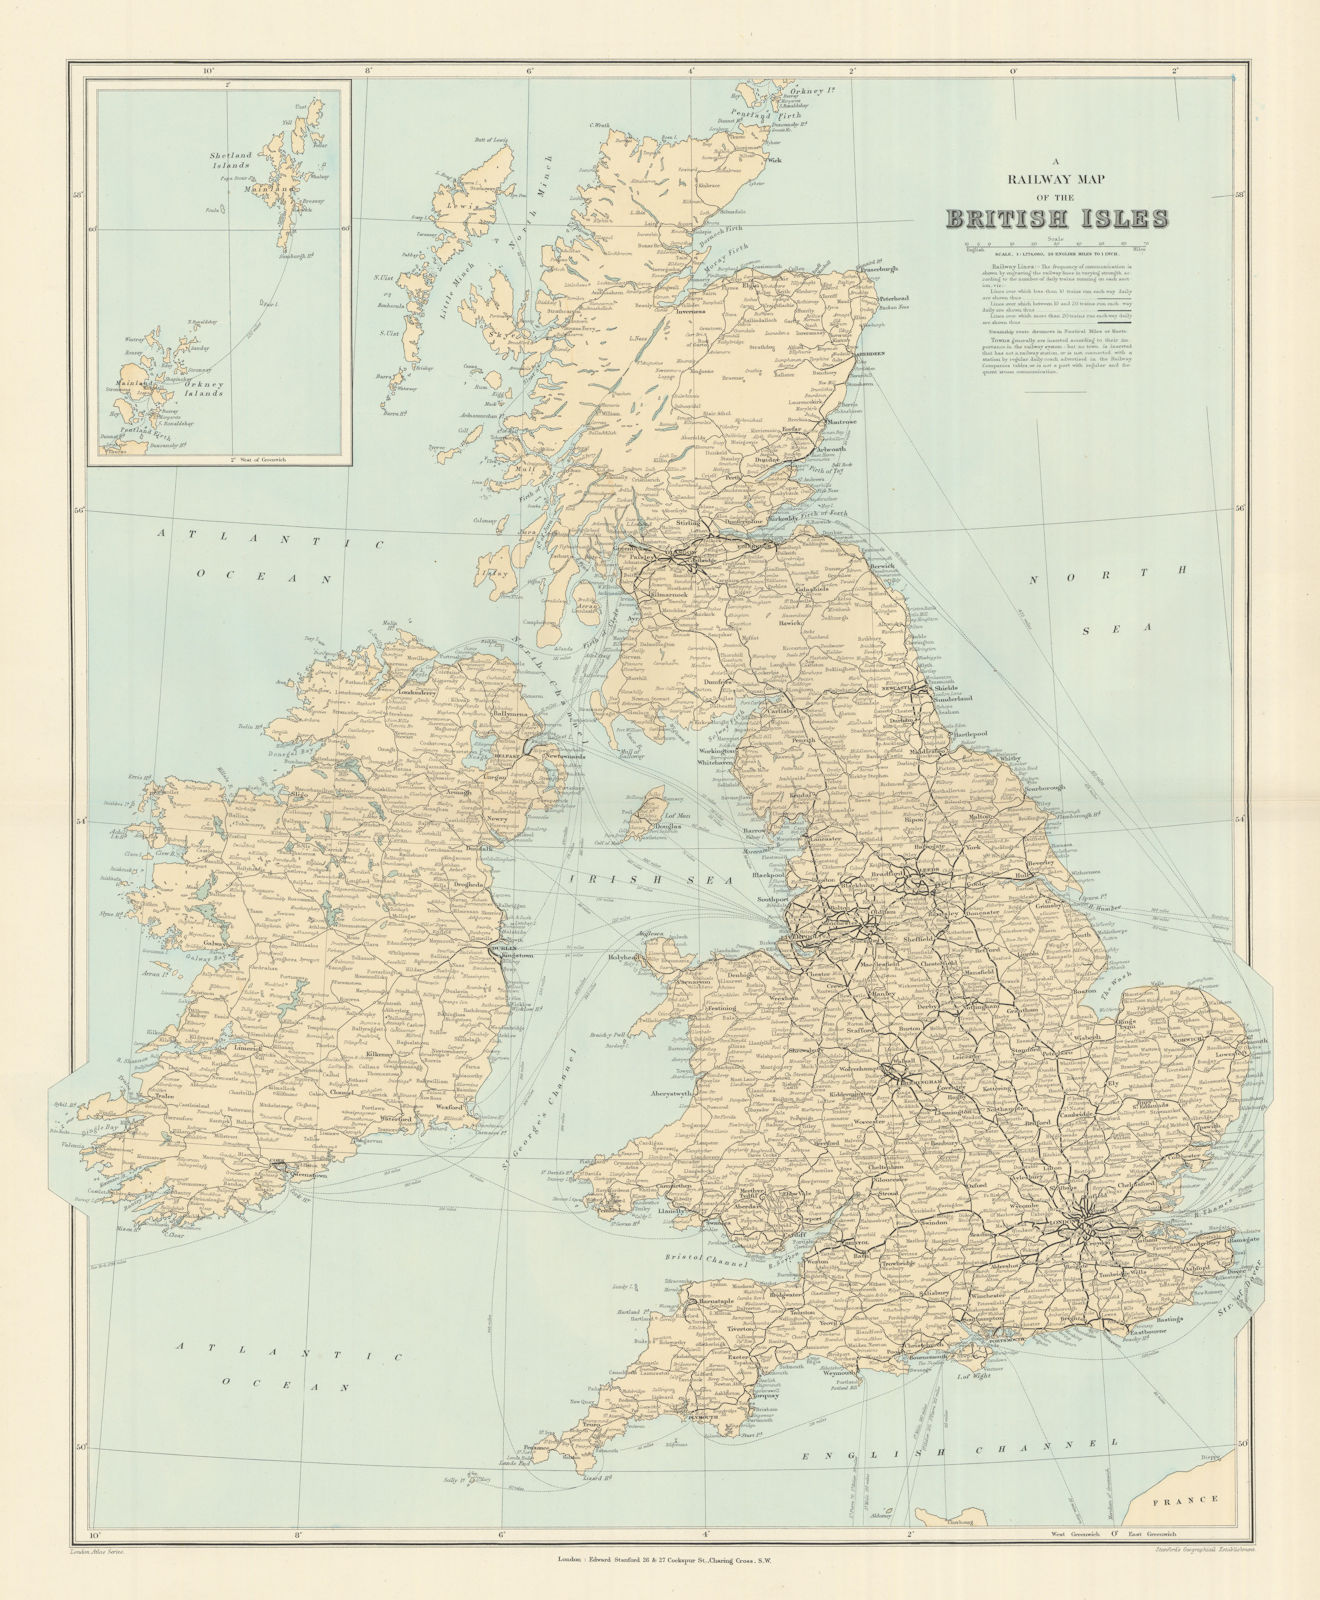 Associate Product Railway map of the British Isles. England Ireland Scotland Wales. STANFORD 1894